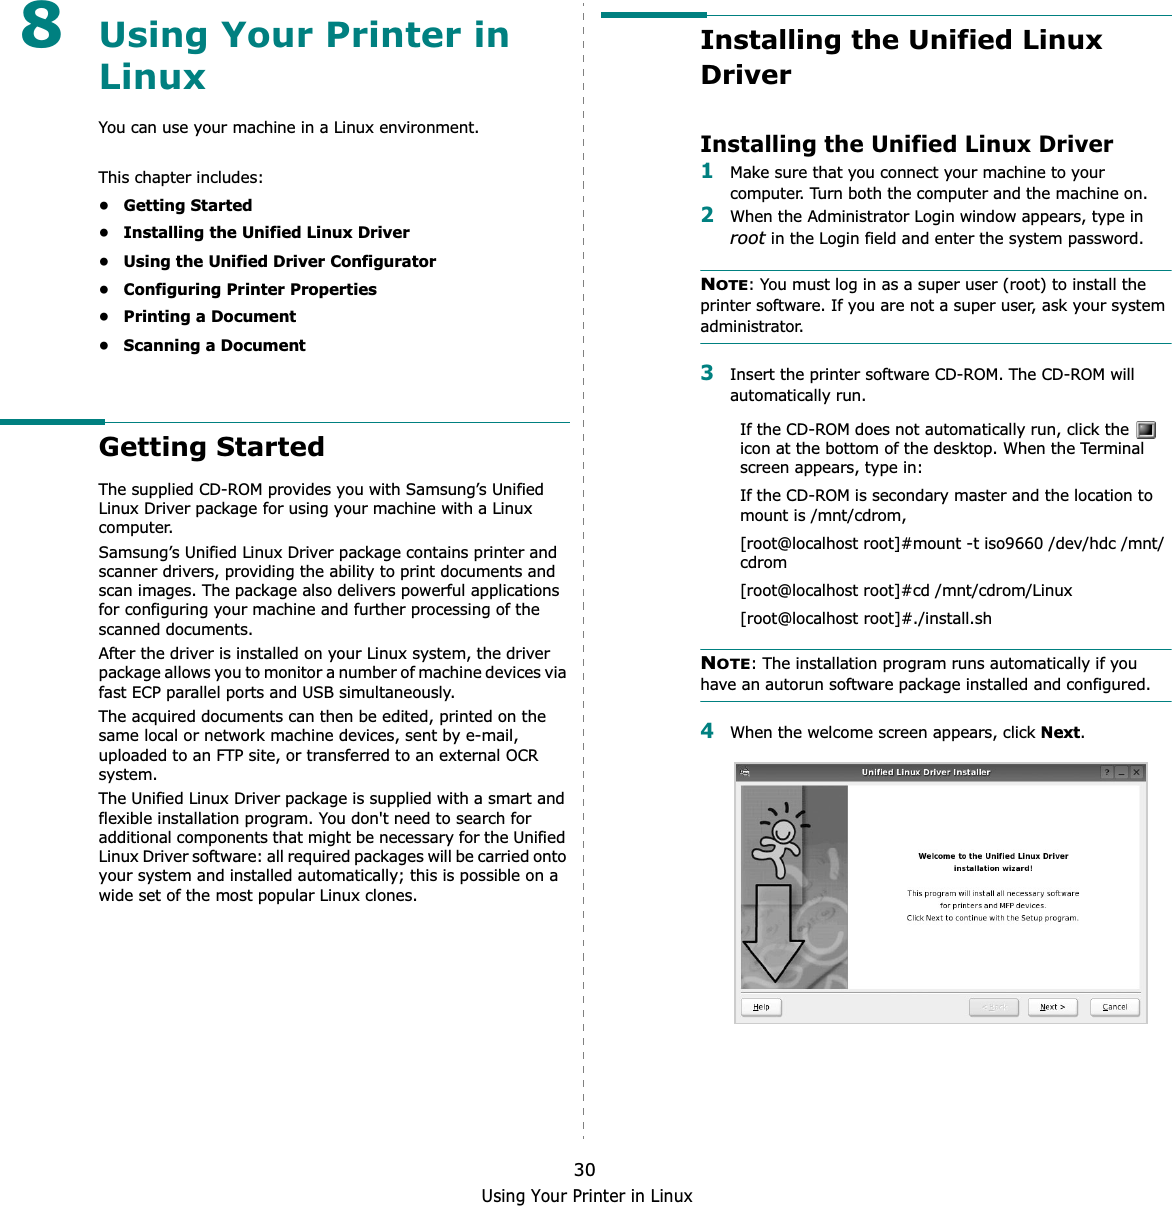 Using Your Printer in Linux308Using Your Printer in LinuxYou can use your machine in a Linux environment. This chapter includes:• Getting Started• Installing the Unified Linux Driver• Using the Unified Driver Configurator• Configuring Printer Properties• Printing a Document• Scanning a DocumentGetting StartedThe supplied CD-ROM provides you with Samsung’s Unified Linux Driver package for using your machine with a Linux computer.Samsung’s Unified Linux Driver package contains printer and scanner drivers, providing the ability to print documents and scan images. The package also delivers powerful applications for configuring your machine and further processing of the scanned documents.After the driver is installed on your Linux system, the driver package allows you to monitor a number of machine devices via fast ECP parallel ports and USB simultaneously. The acquired documents can then be edited, printed on the same local or network machine devices, sent by e-mail, uploaded to an FTP site, or transferred to an external OCR system.The Unified Linux Driver package is supplied with a smart and flexible installation program. You don&apos;t need to search for additional components that might be necessary for the Unified Linux Driver software: all required packages will be carried onto your system and installed automatically; this is possible on a wide set of the most popular Linux clones.Installing the Unified Linux DriverInstalling the Unified Linux Driver1Make sure that you connect your machine to your computer. Turn both the computer and the machine on.2When the Administrator Login window appears, type in root in the Login field and enter the system password.NOTE: You must log in as a super user (root) to install the printer software. If you are not a super user, ask your system administrator.3Insert the printer software CD-ROM. The CD-ROM will automatically run.If the CD-ROM does not automatically run, click the   icon at the bottom of the desktop. When the Terminal screen appears, type in:If the CD-ROM is secondary master and the location to mount is /mnt/cdrom,[root@localhost root]#mount -t iso9660 /dev/hdc /mnt/cdrom[root@localhost root]#cd /mnt/cdrom/Linux[root@localhost root]#./install.sh NOTE: The installation program runs automatically if you have an autorun software package installed and configured.4When the welcome screen appears, click Next.